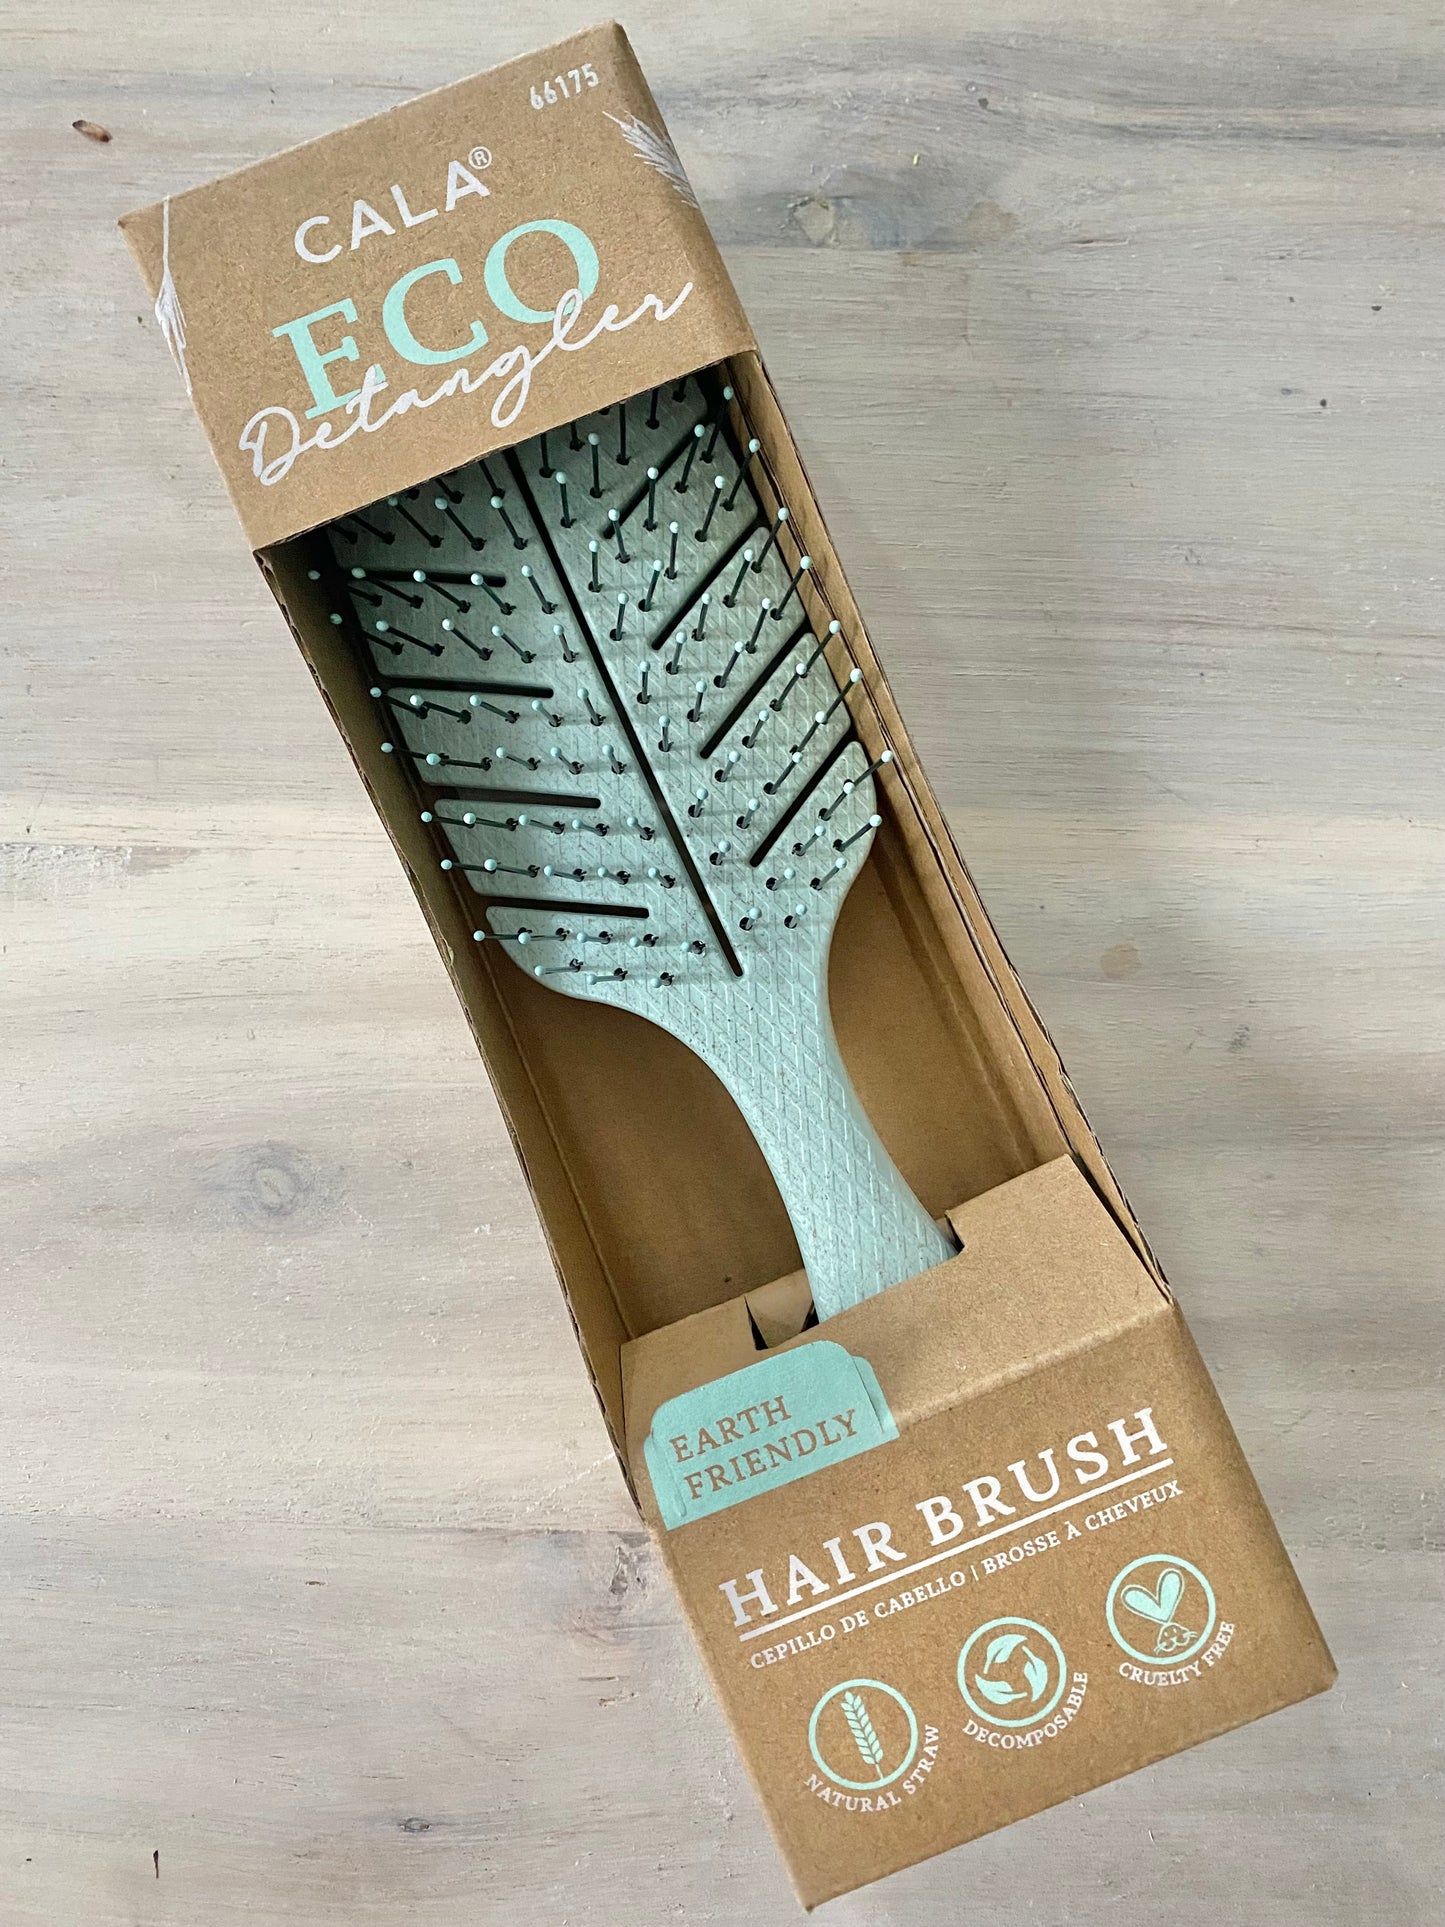 Detangling brush in box labeled decompostable, cruelty free, and earth friendly.